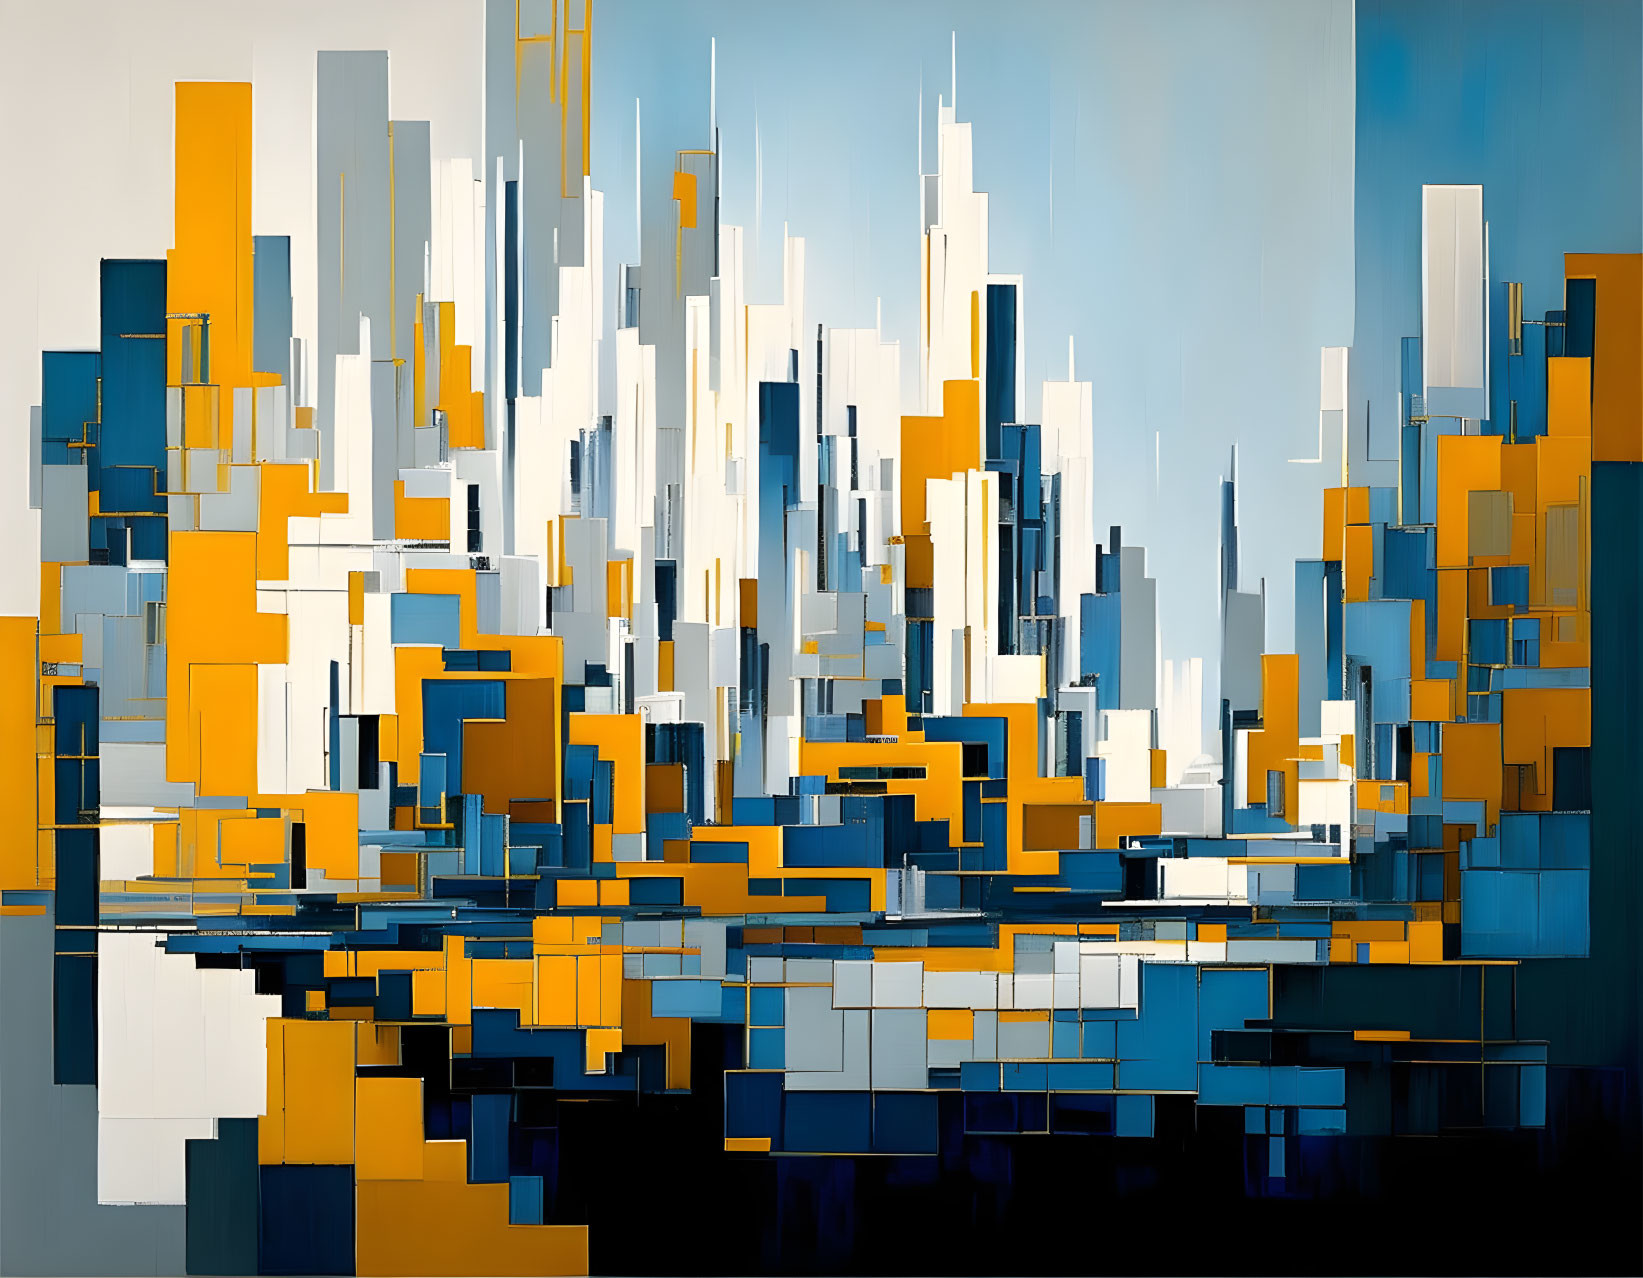 Soutl of A City semi-abstract painting that includ